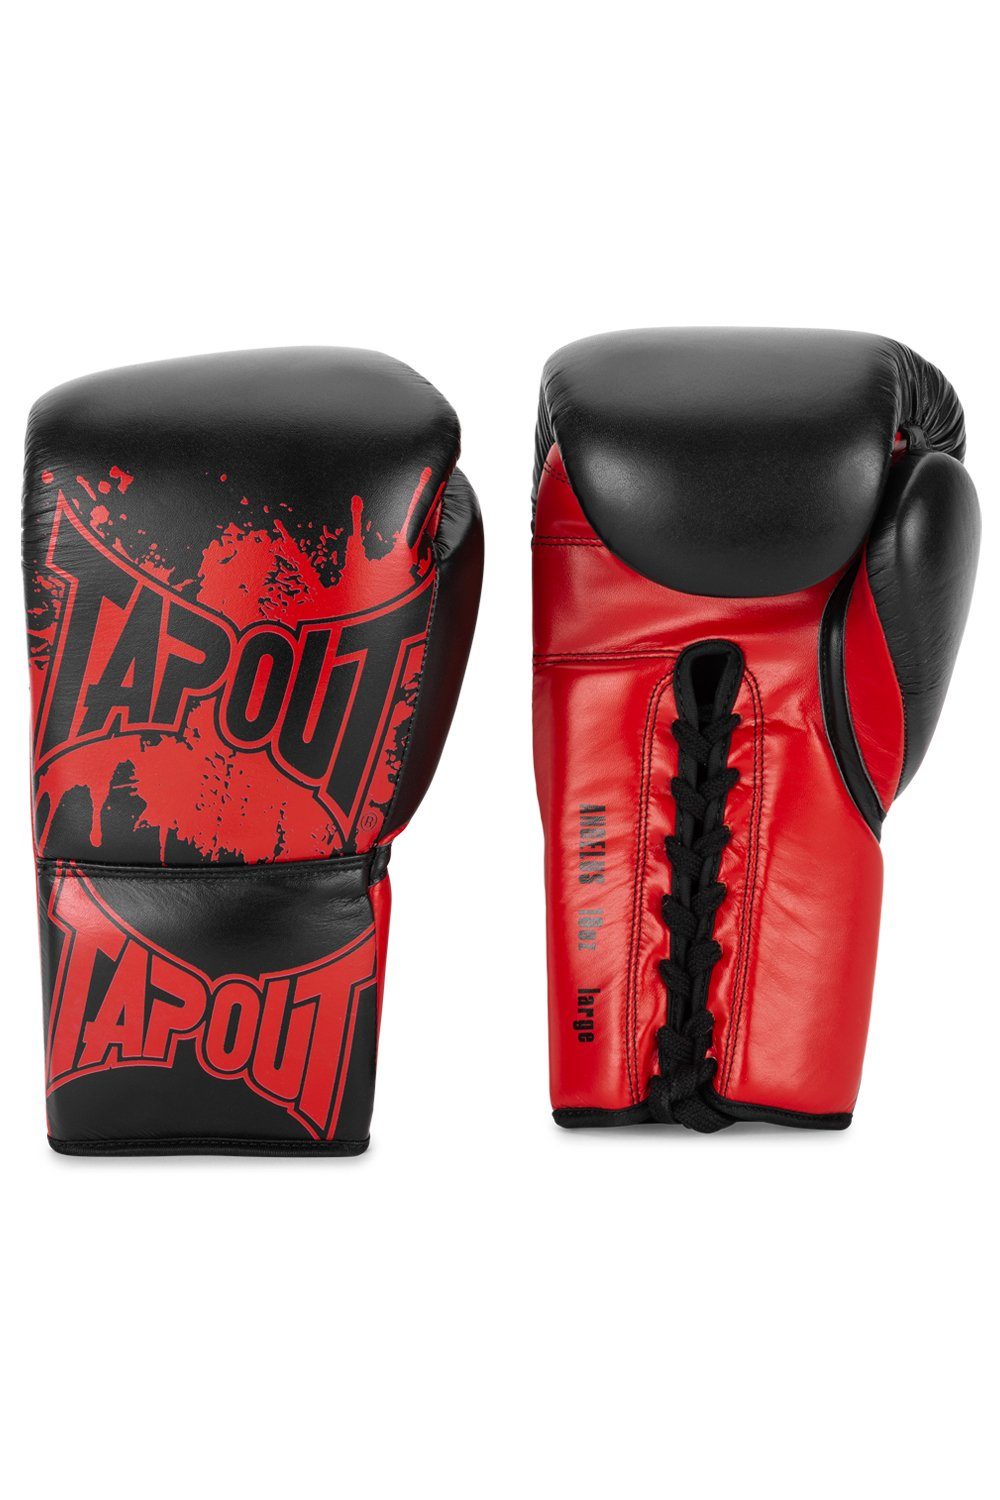 TAPOUT Boxhandschuhe ANGELUS Black/Red